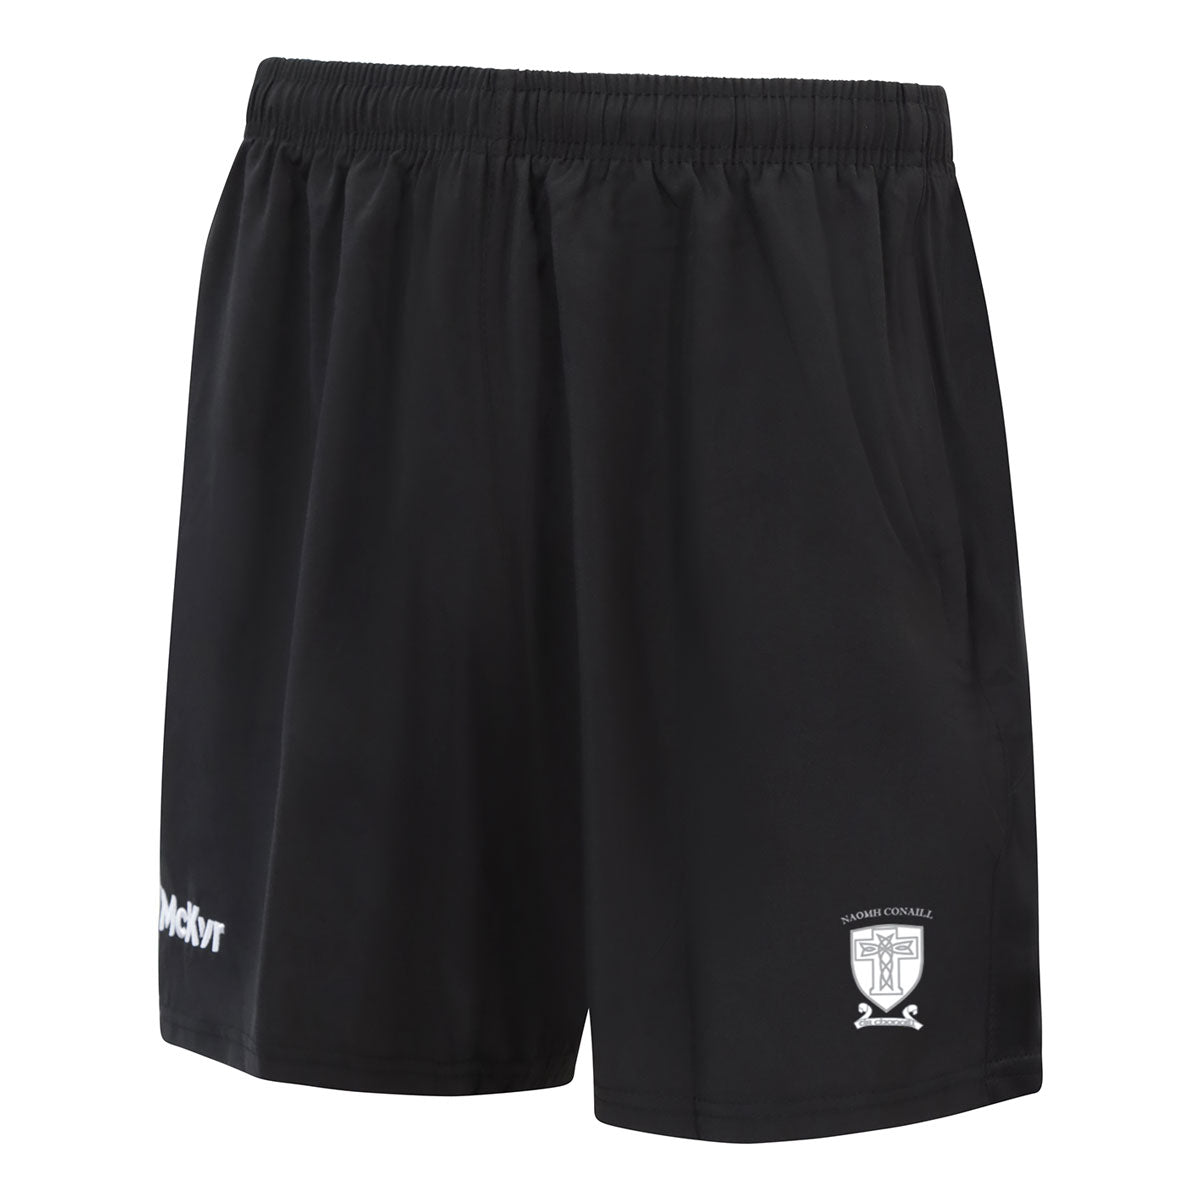 Mc Keever Naomh Conaill Donegal Core 22 Leisure Shorts - Adult - Black